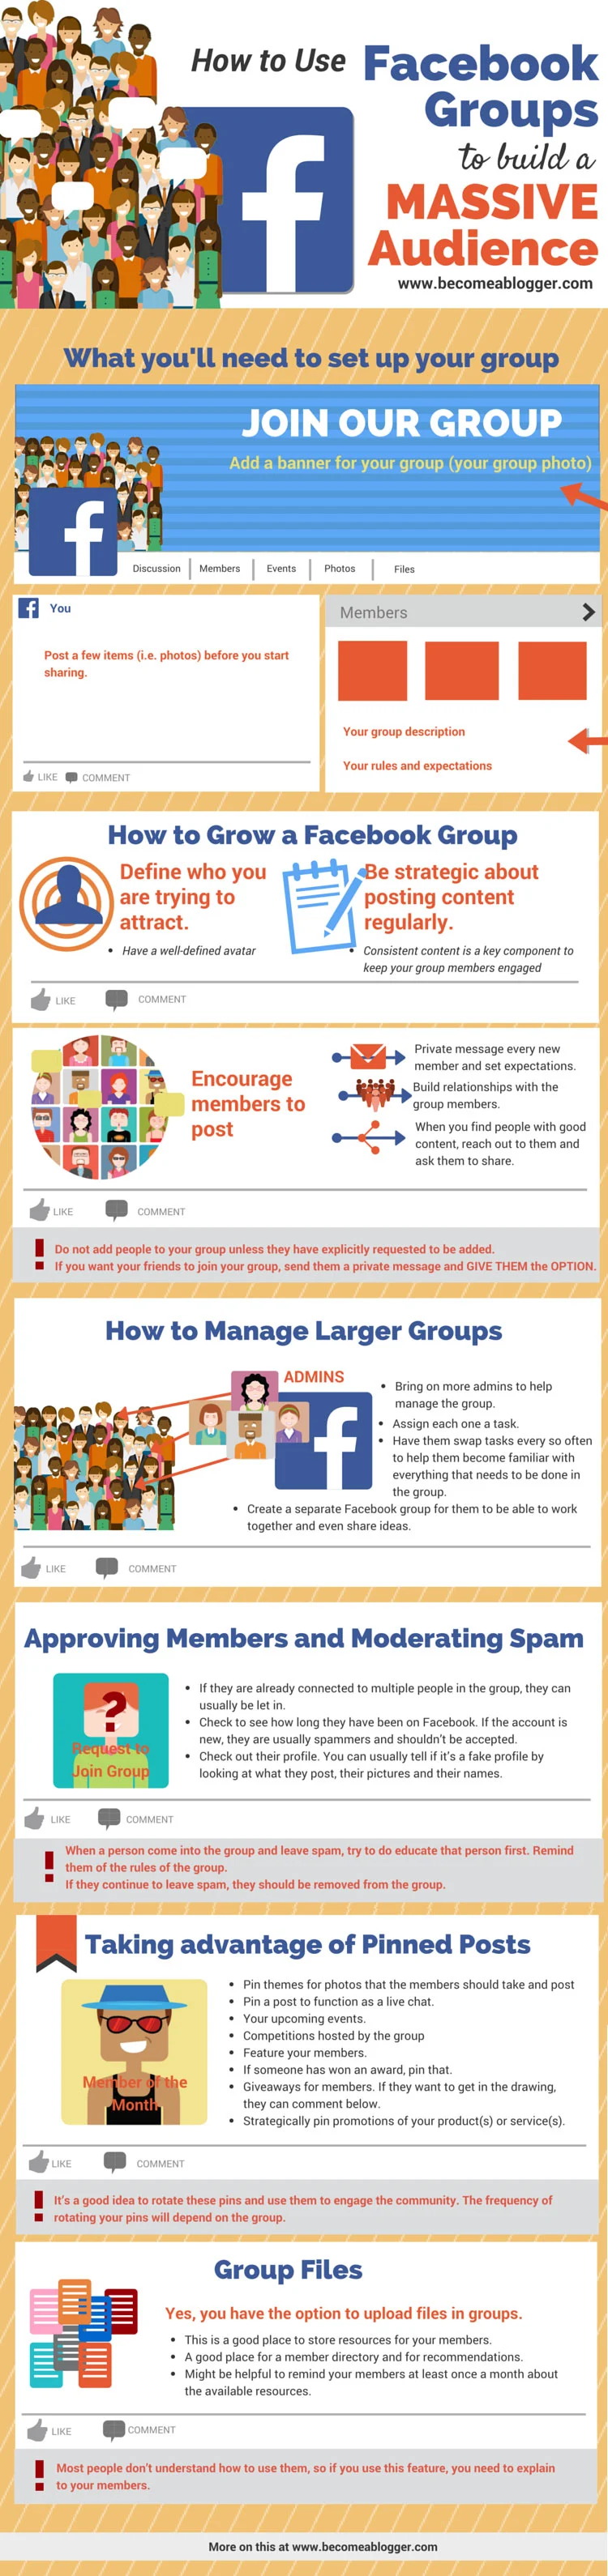 How to Use Facebook Groups to Build a Massive Audience - infographic